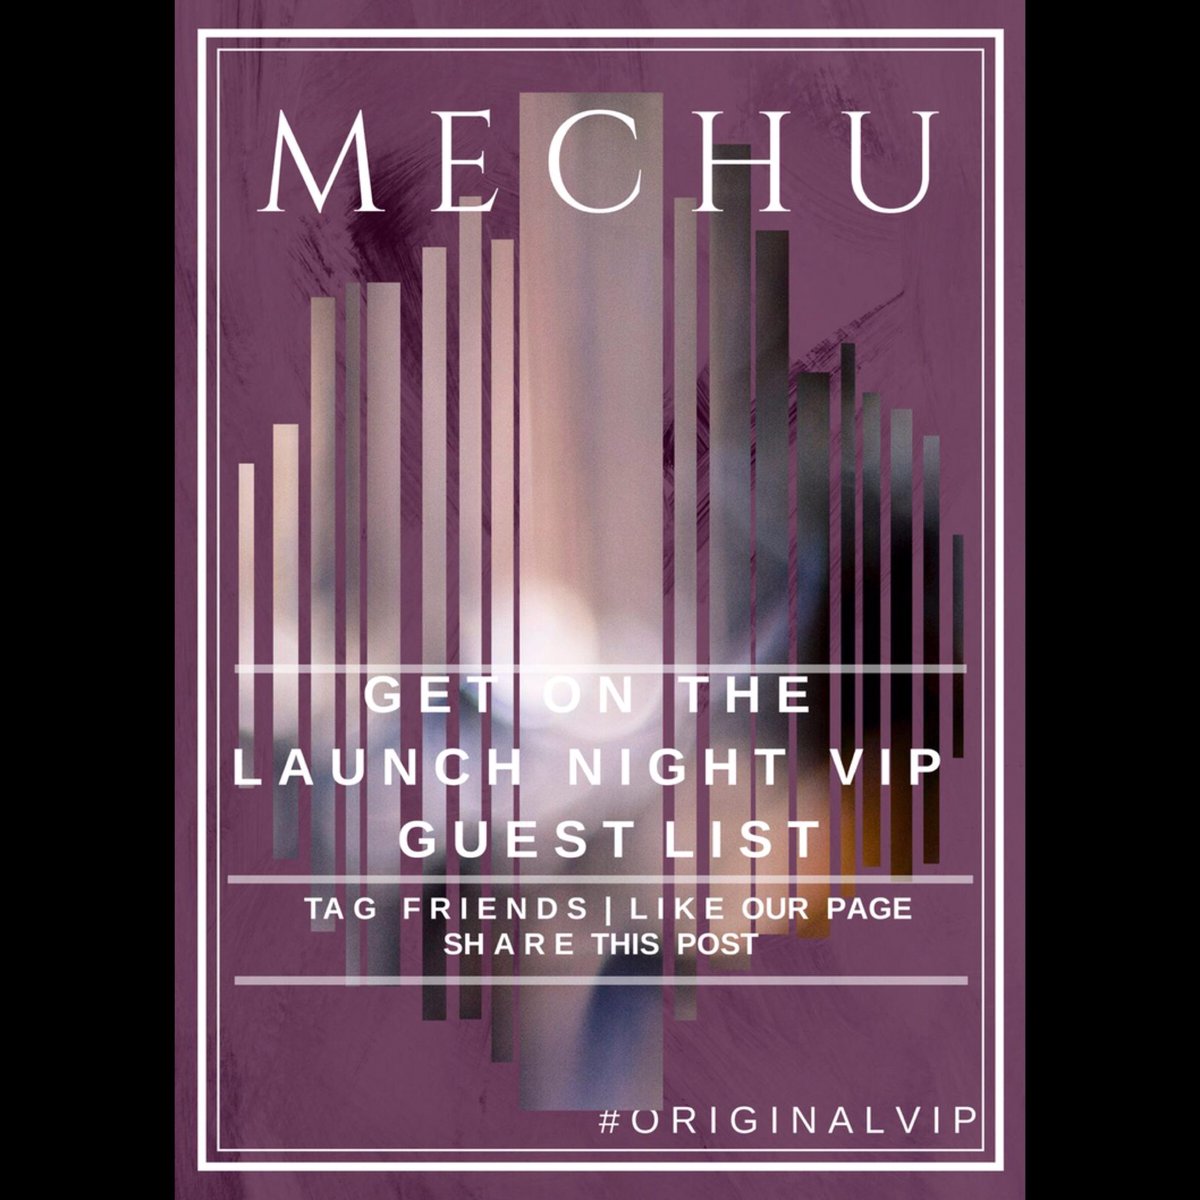 **VIP Guest List Alert**

Due to demand we are extending our Guest List...

Here is your FINAL chance for you & your friends to get on THE VIP Guest List of the season! 

Click here for details: bit.ly/2N6L9RM

#originalvip #launchnight #vipguestlist